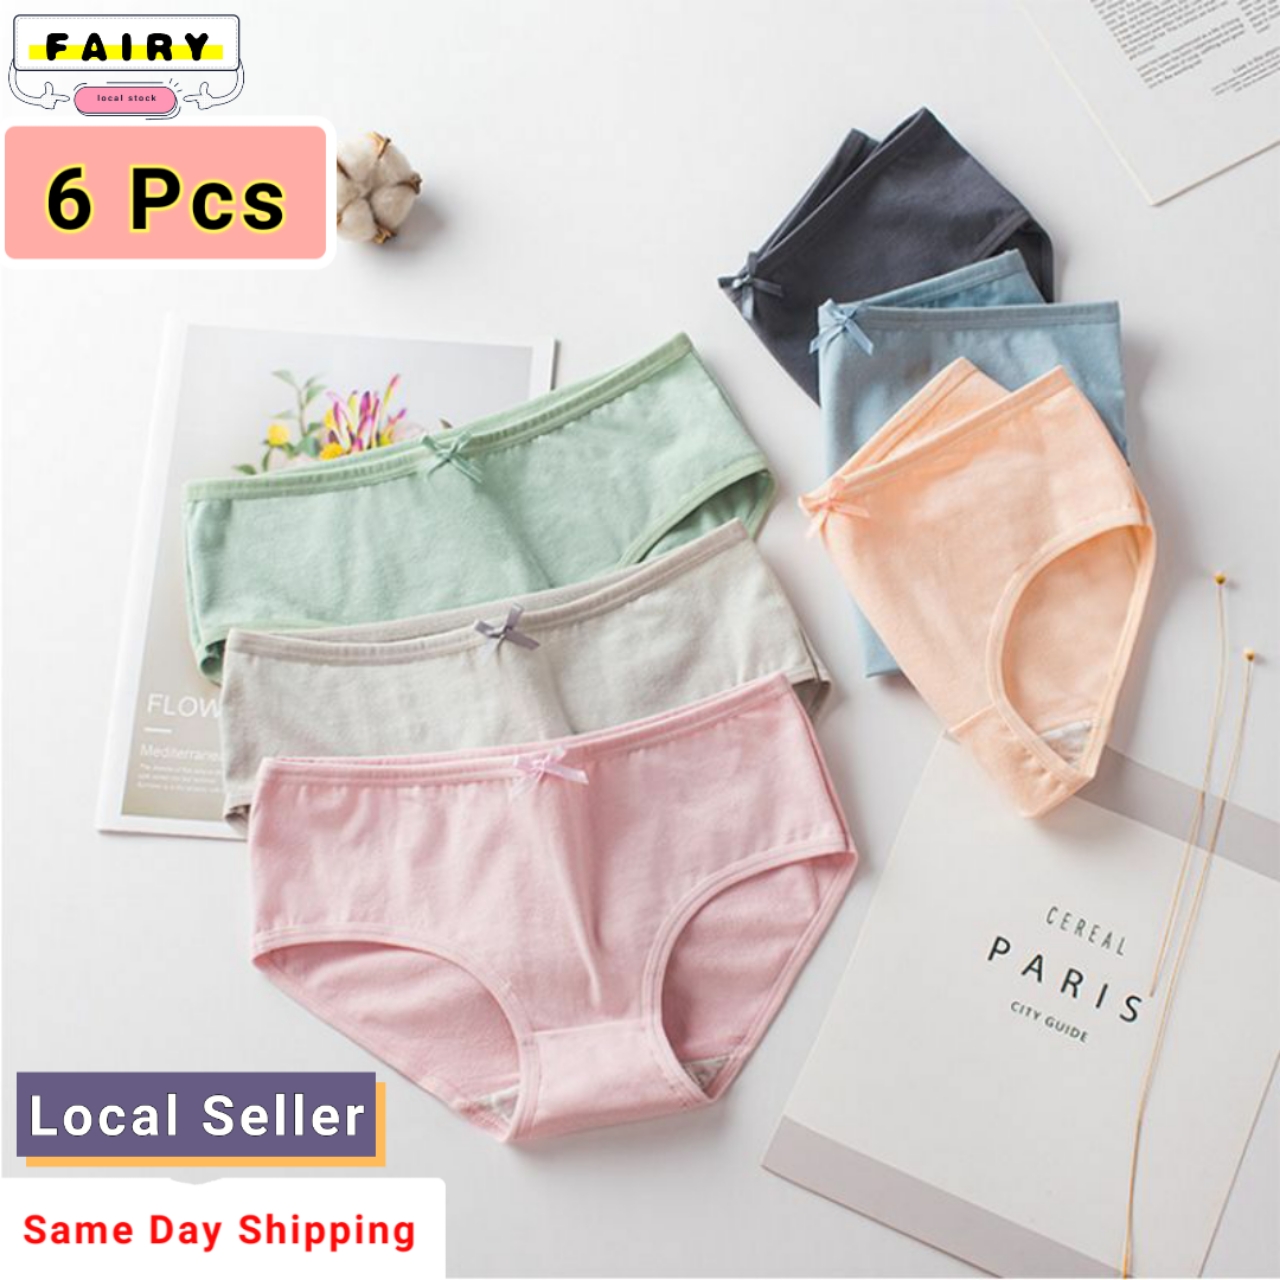 SG Seller) 6 Pcs Woman Panties Cotton Underwear Seamless sweet candy color  Cotton underpants briefs sexy cute design girls panties lady Female panty